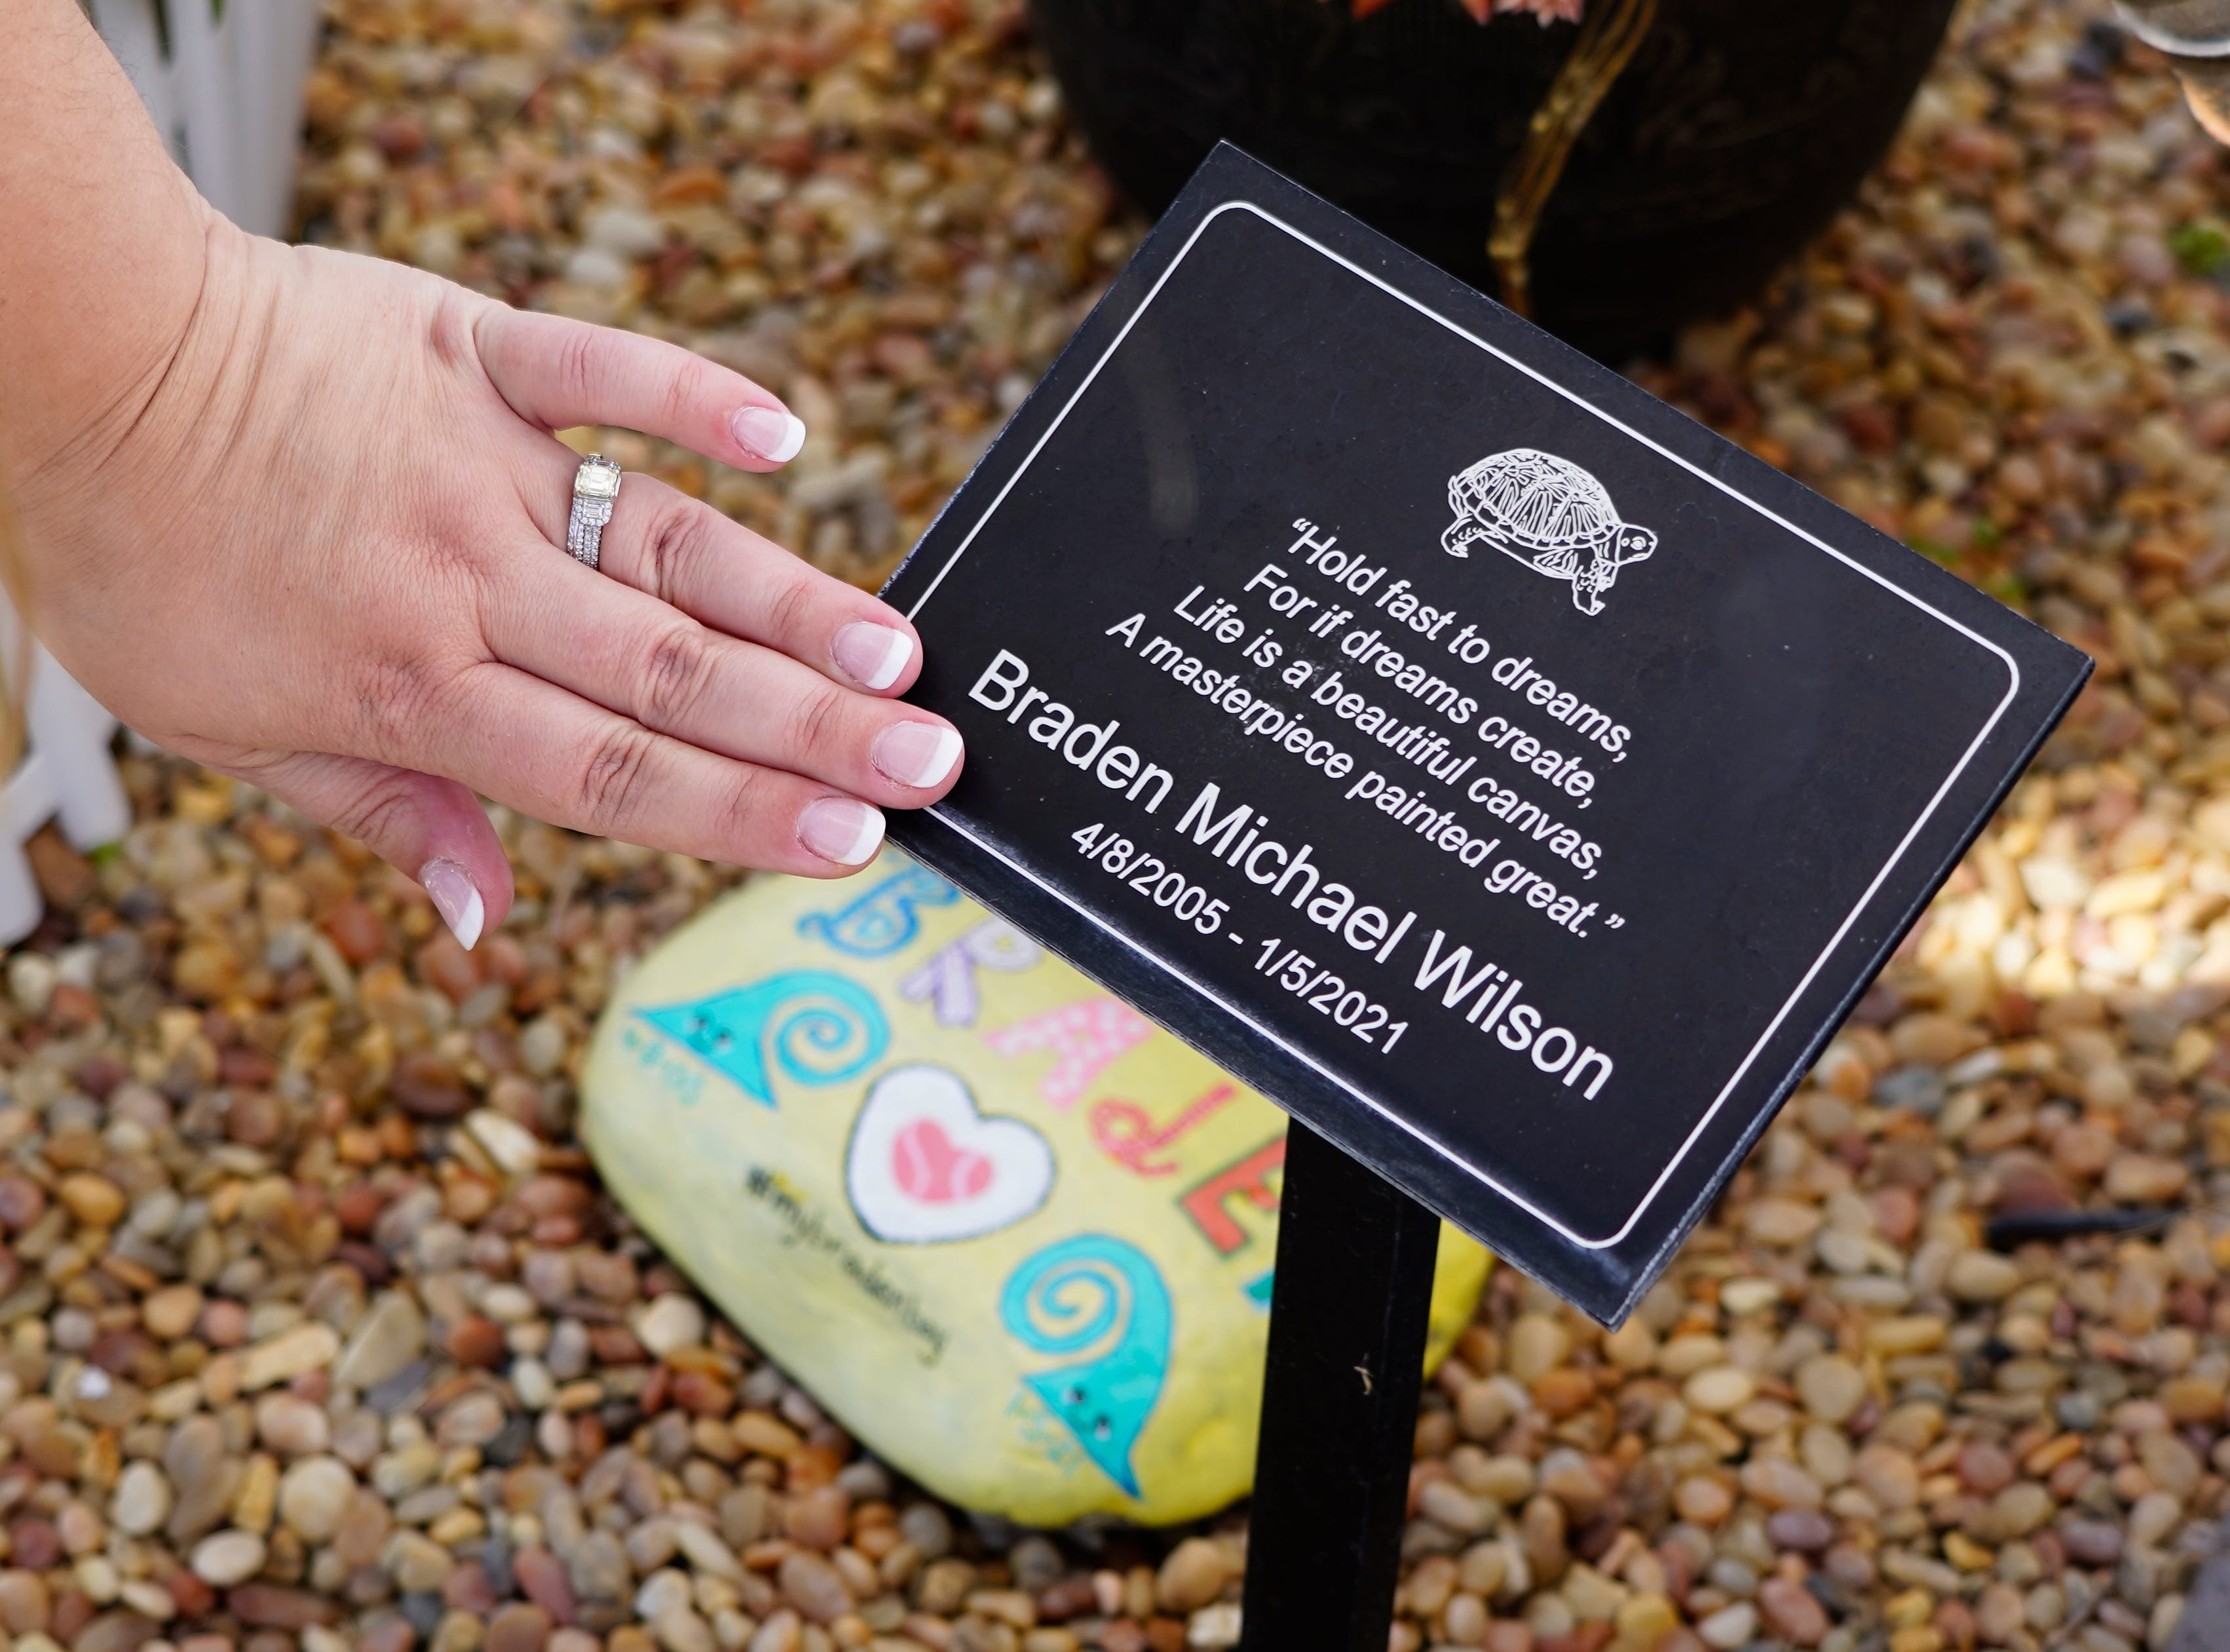 Amanda Wilson wipes off dust on a sign at a free library at her home in Simi Valley, Calif. in March, 2022. The sign is a quote from her 15-year-old son, Braden who died in January 2021 after contracting COVID-19 in December 2020.